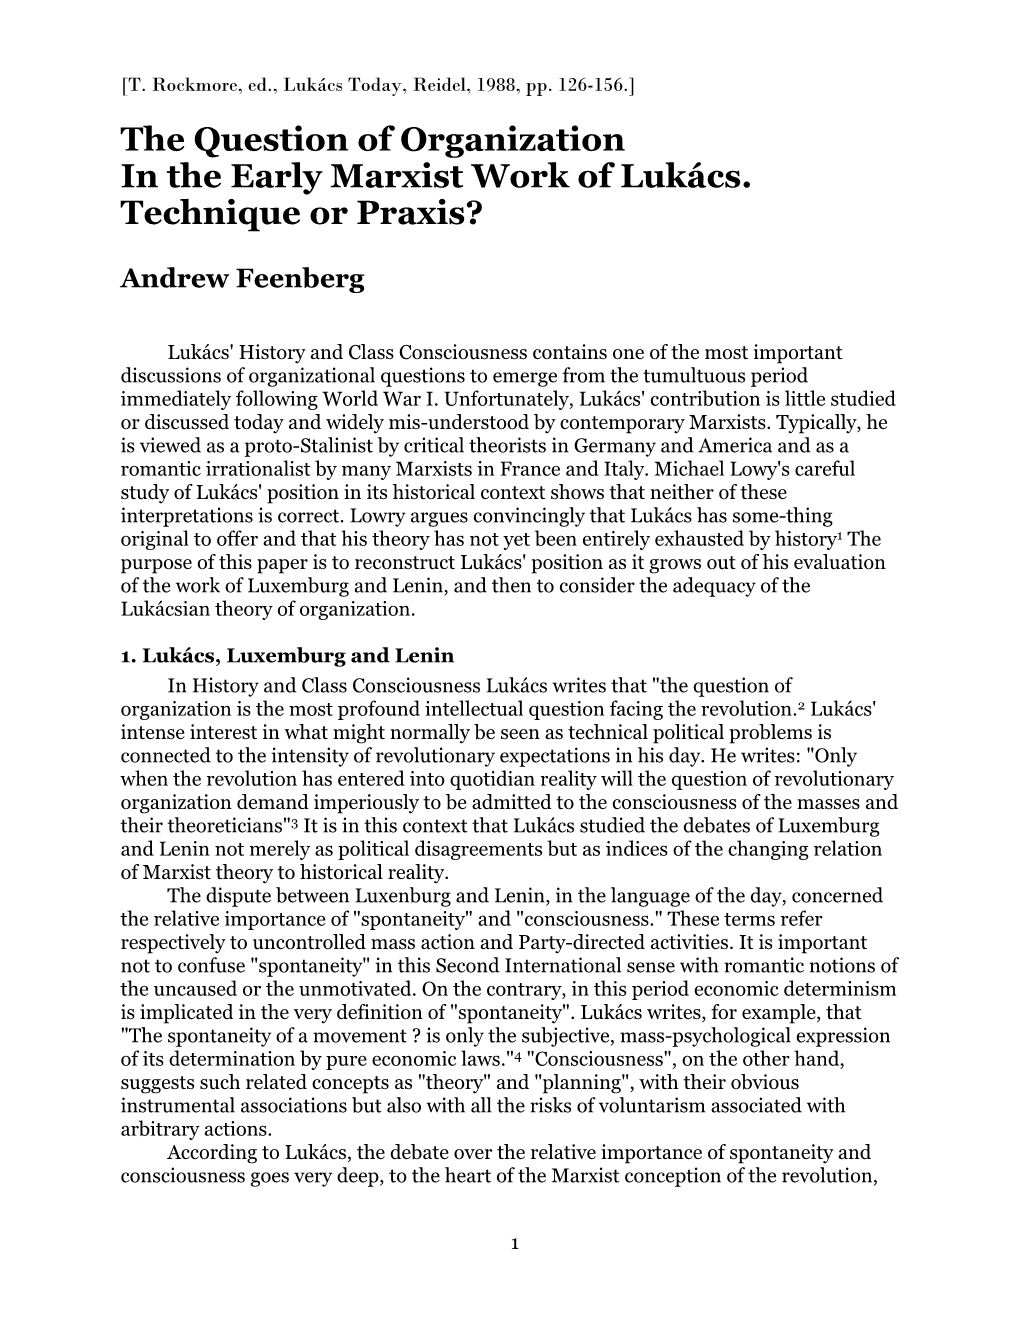 The Question of Organization in the Early Marxist Work of Lukács. Technique Or Praxis?